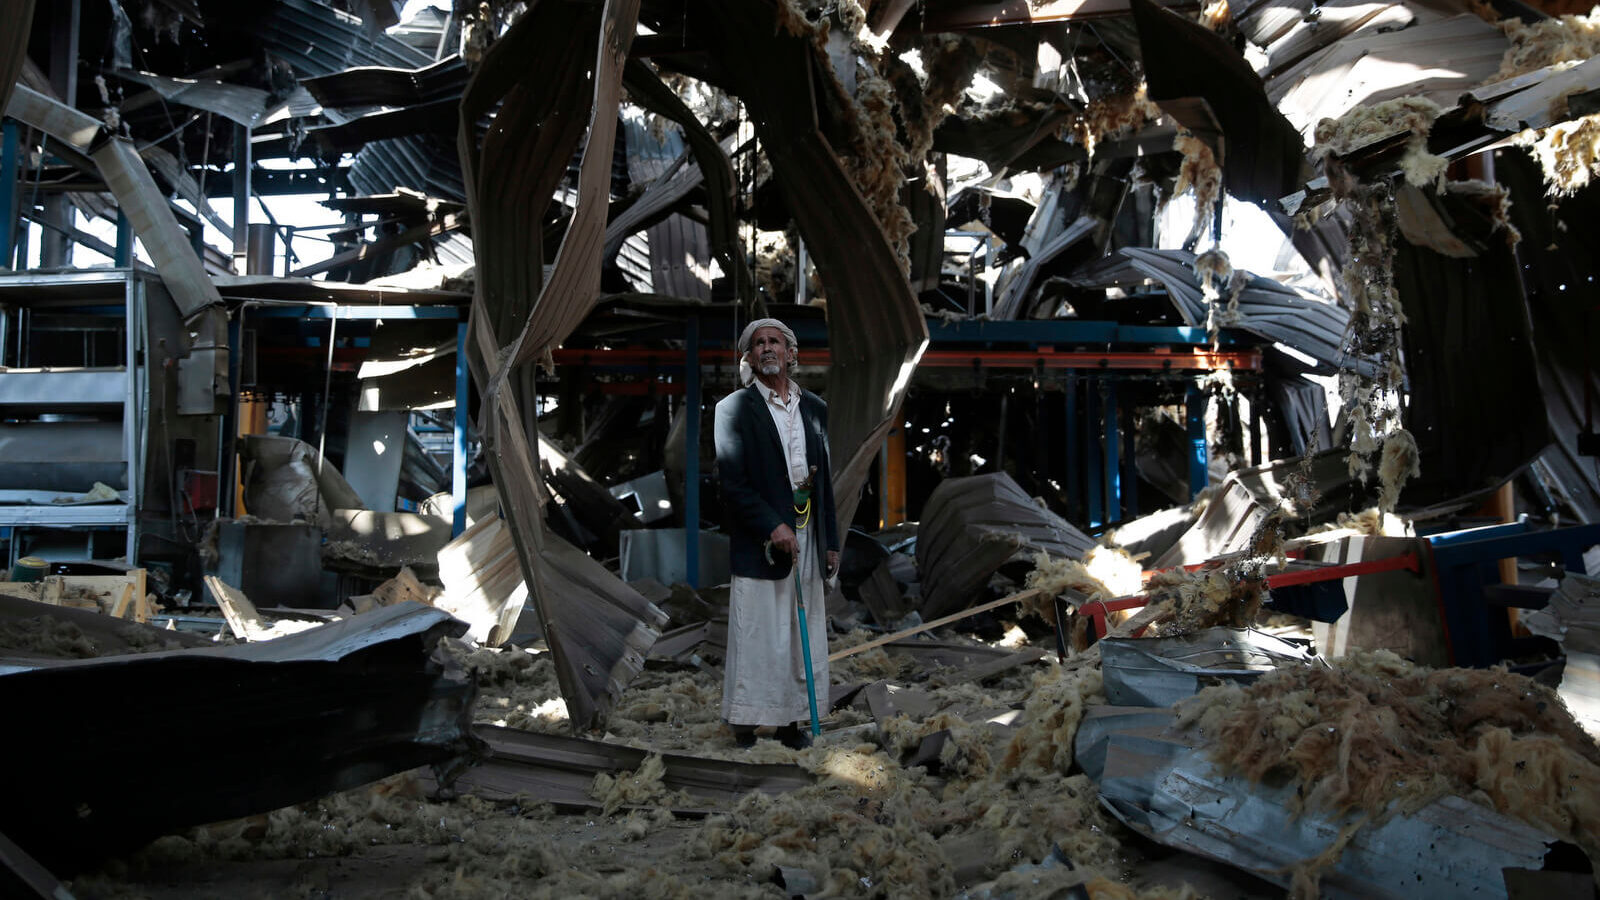 An elderly man stands among the rubble of the Alsonidar Group's water pump and pipe factory after it was hit by Saudi-led airstrikes in Sanaa, Yemen, Sept. 22, 2016. Hani Mohammed | AP